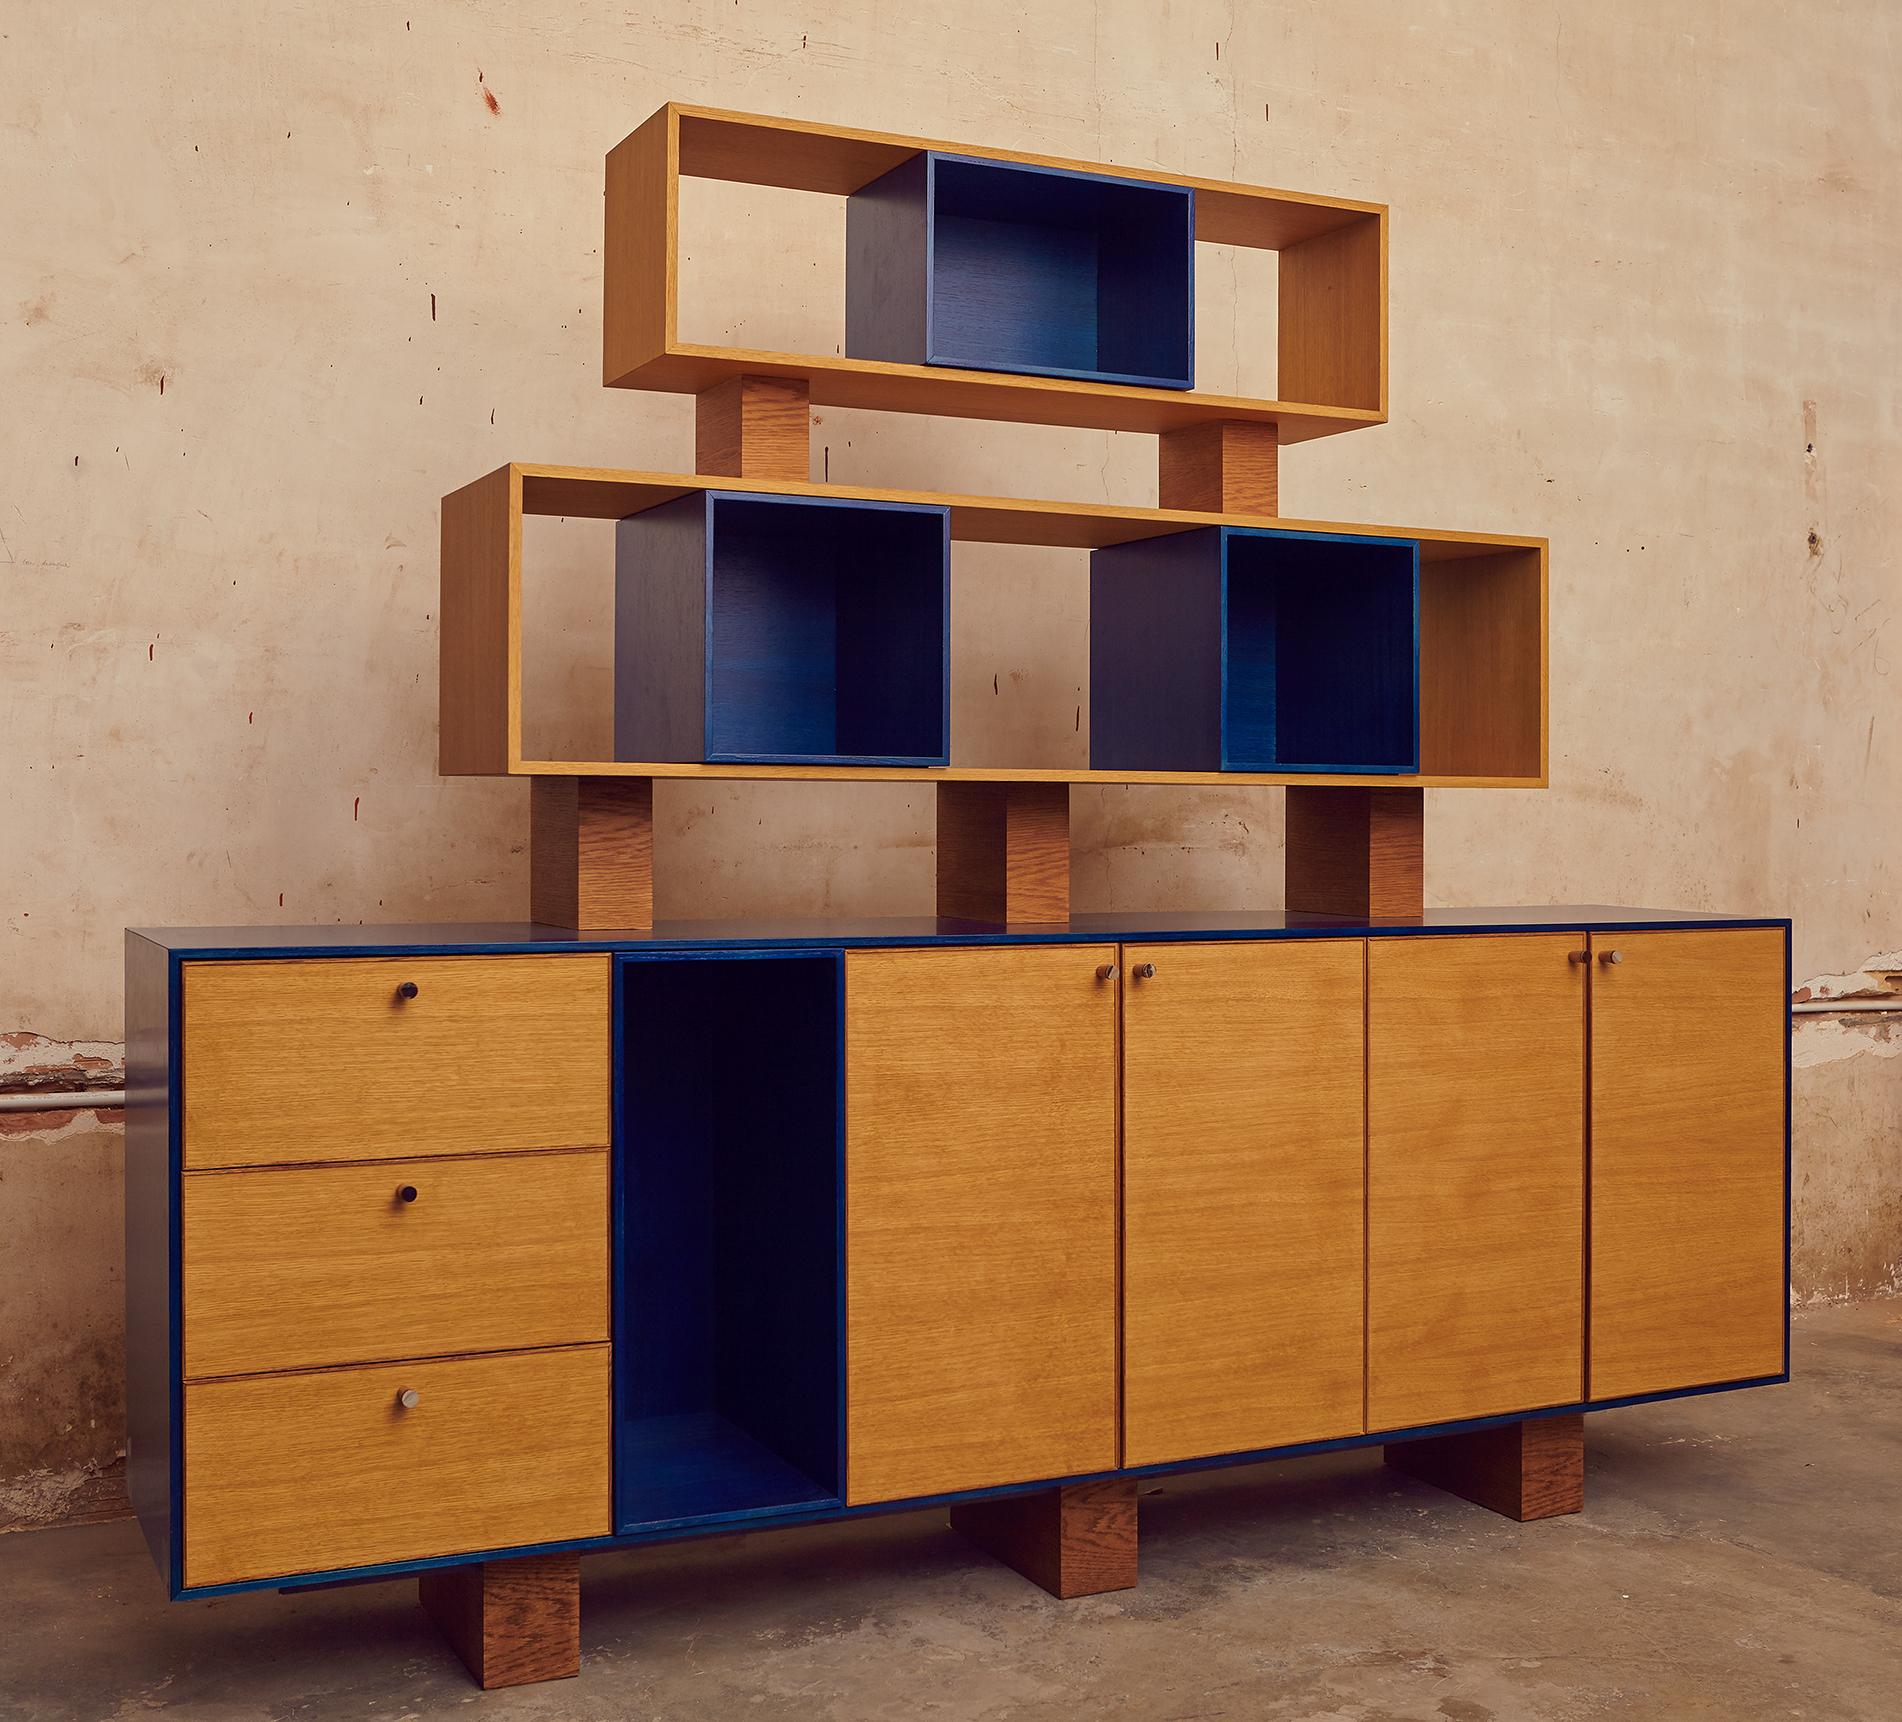 This Italian designed contemporary pyramid wall unit is hand finished in oak. This magnificent freestanding modular wall unit provides multiple storage configuration option. Shown here the unit was customized for a teenager's bedroom to provide